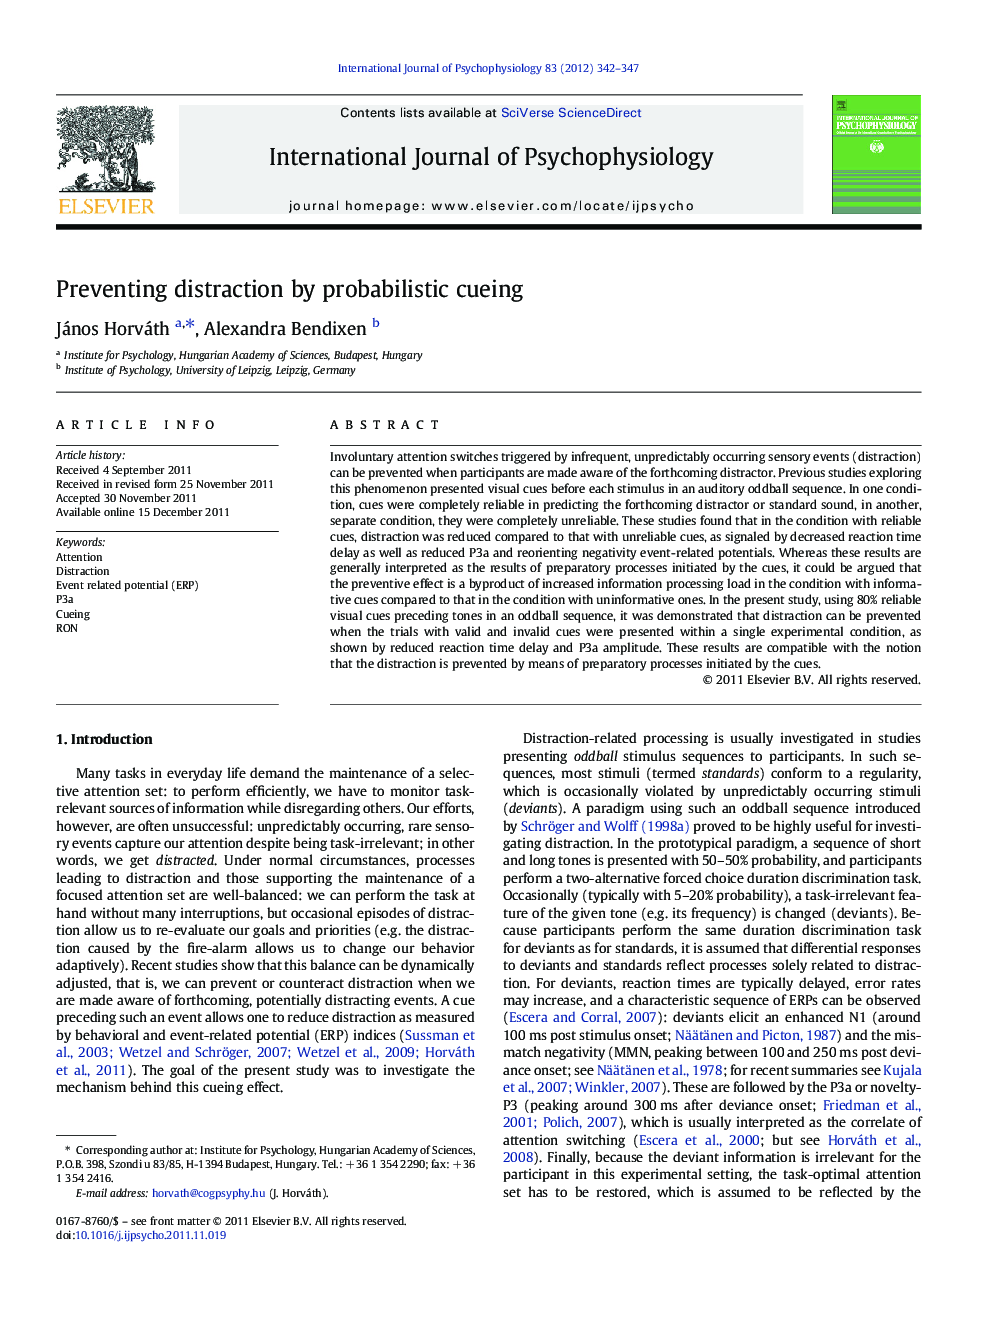 Preventing distraction by probabilistic cueing